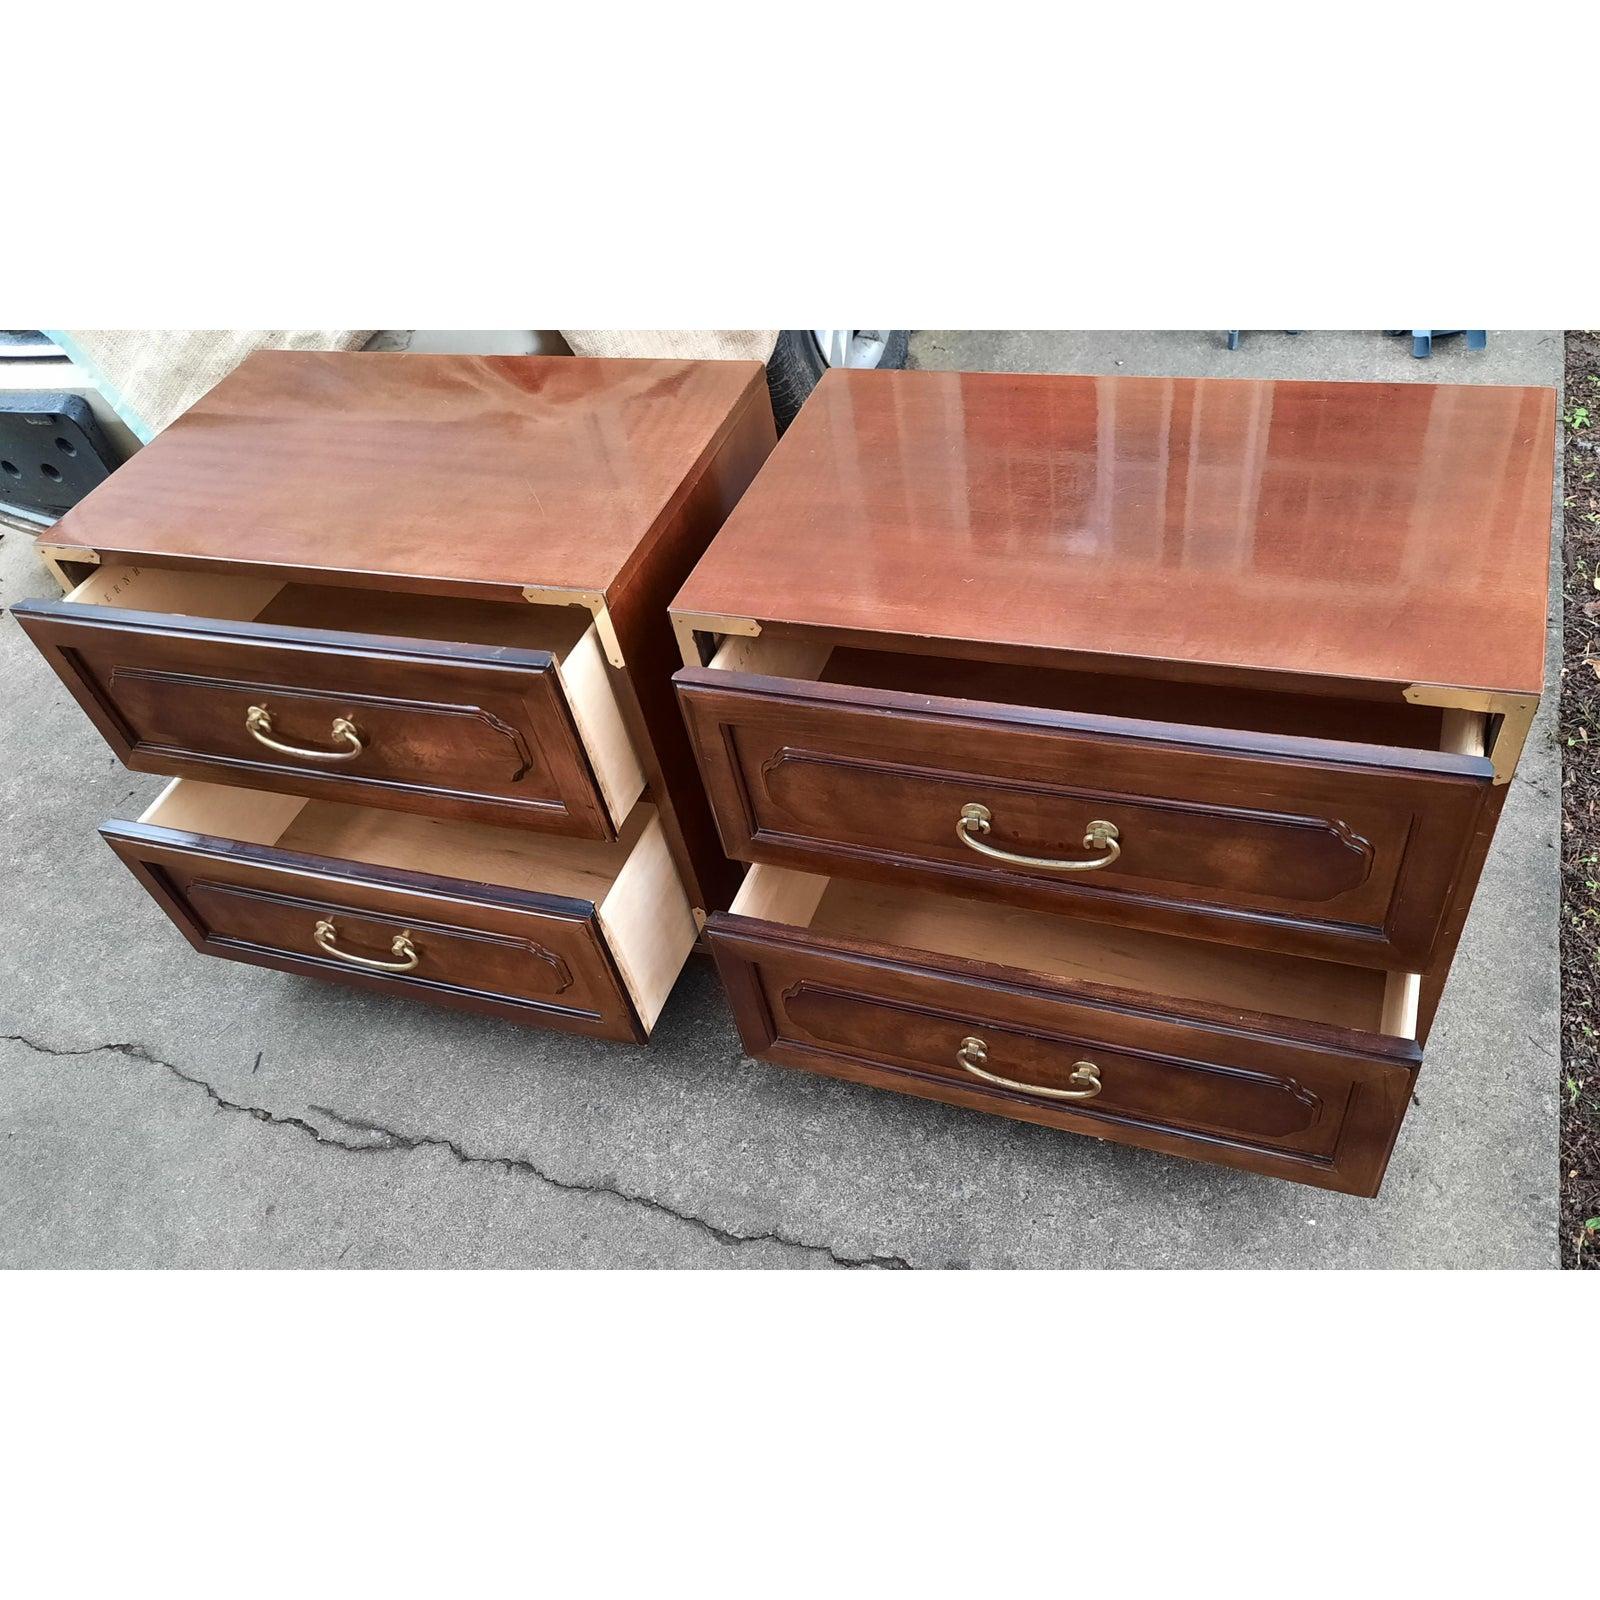 20th Century Bernhardt Asian American Campaign Mahogany Burl Nightstands, a Pair For Sale